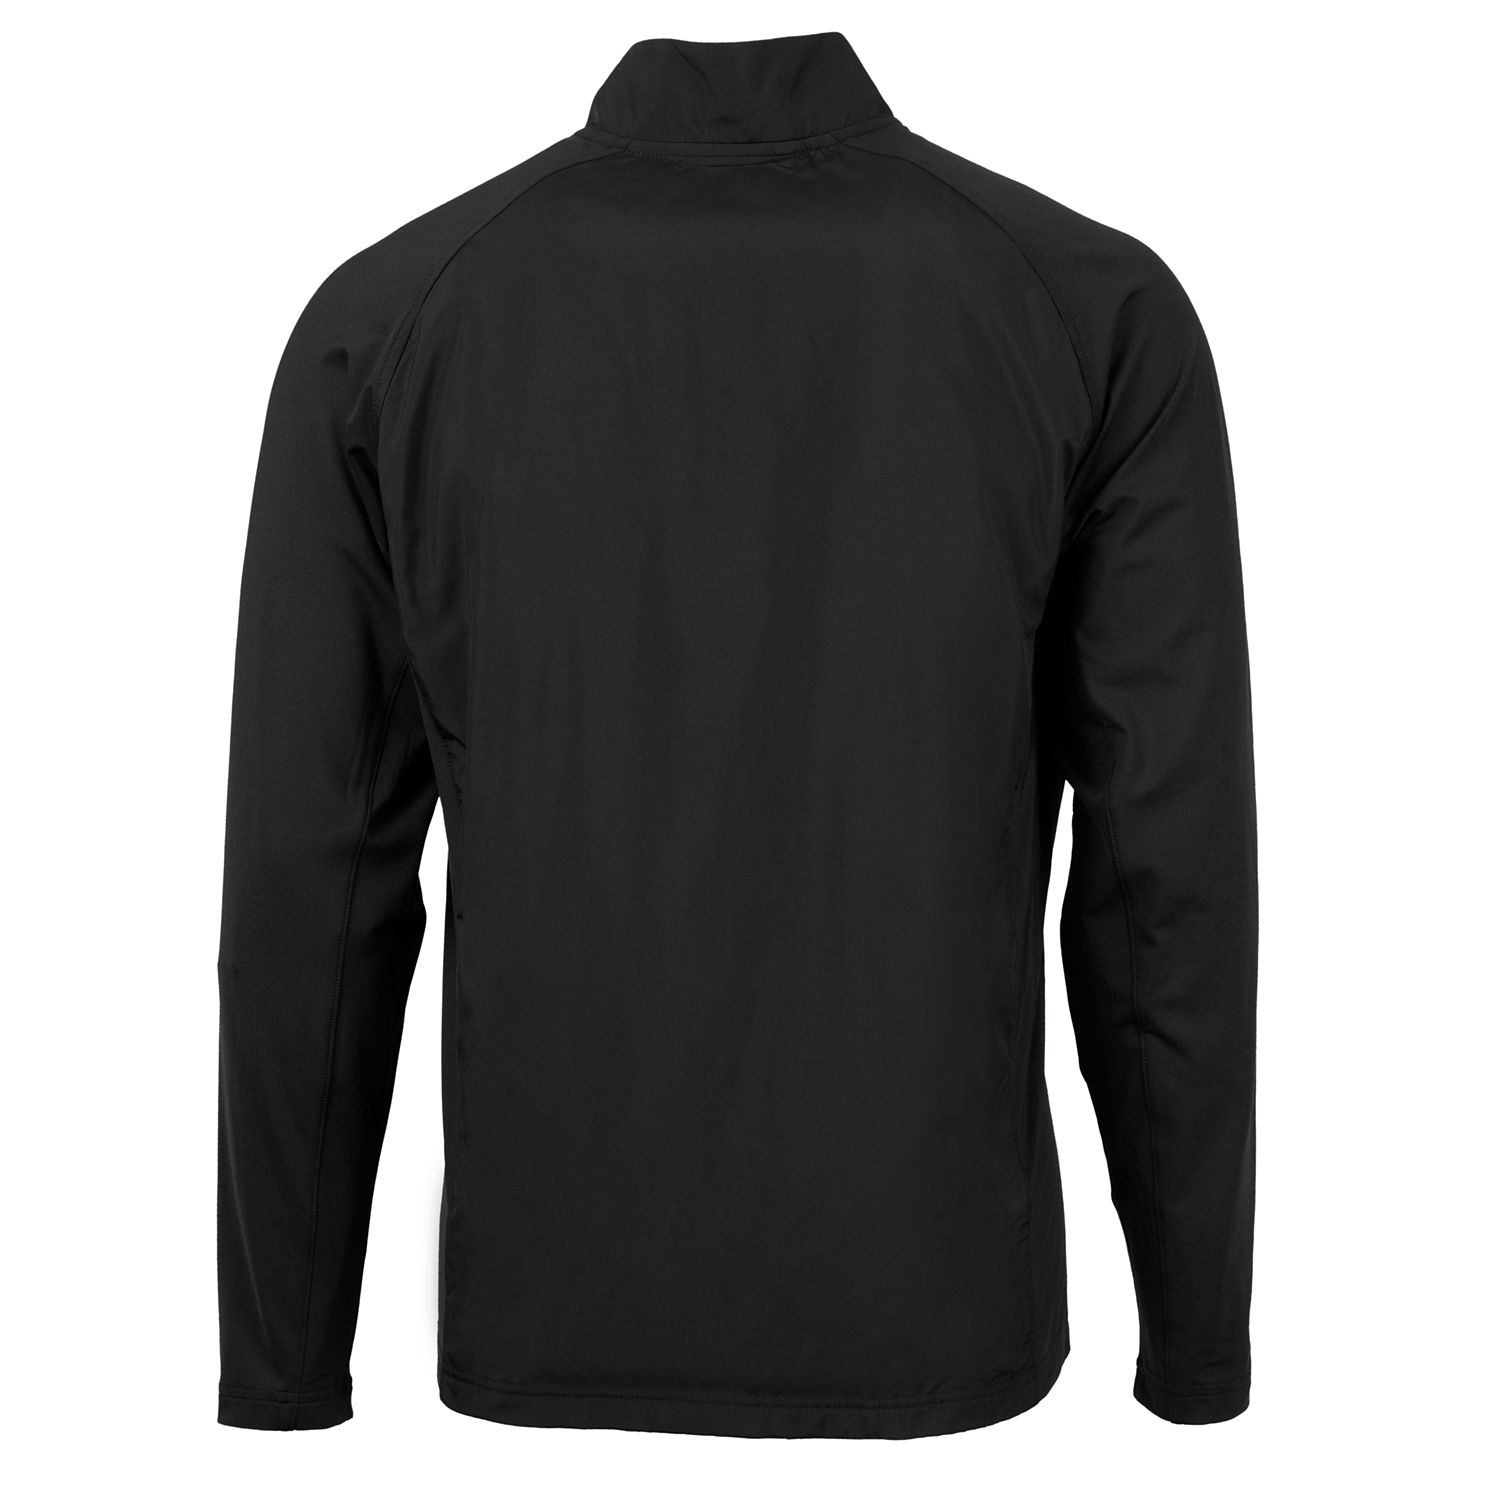 Men's Cutter & Buck Black Pacific Tigers Big & Tall Adapt Eco Knit Hybrid Recycled Full-Zip Jacket - image 3 of 3